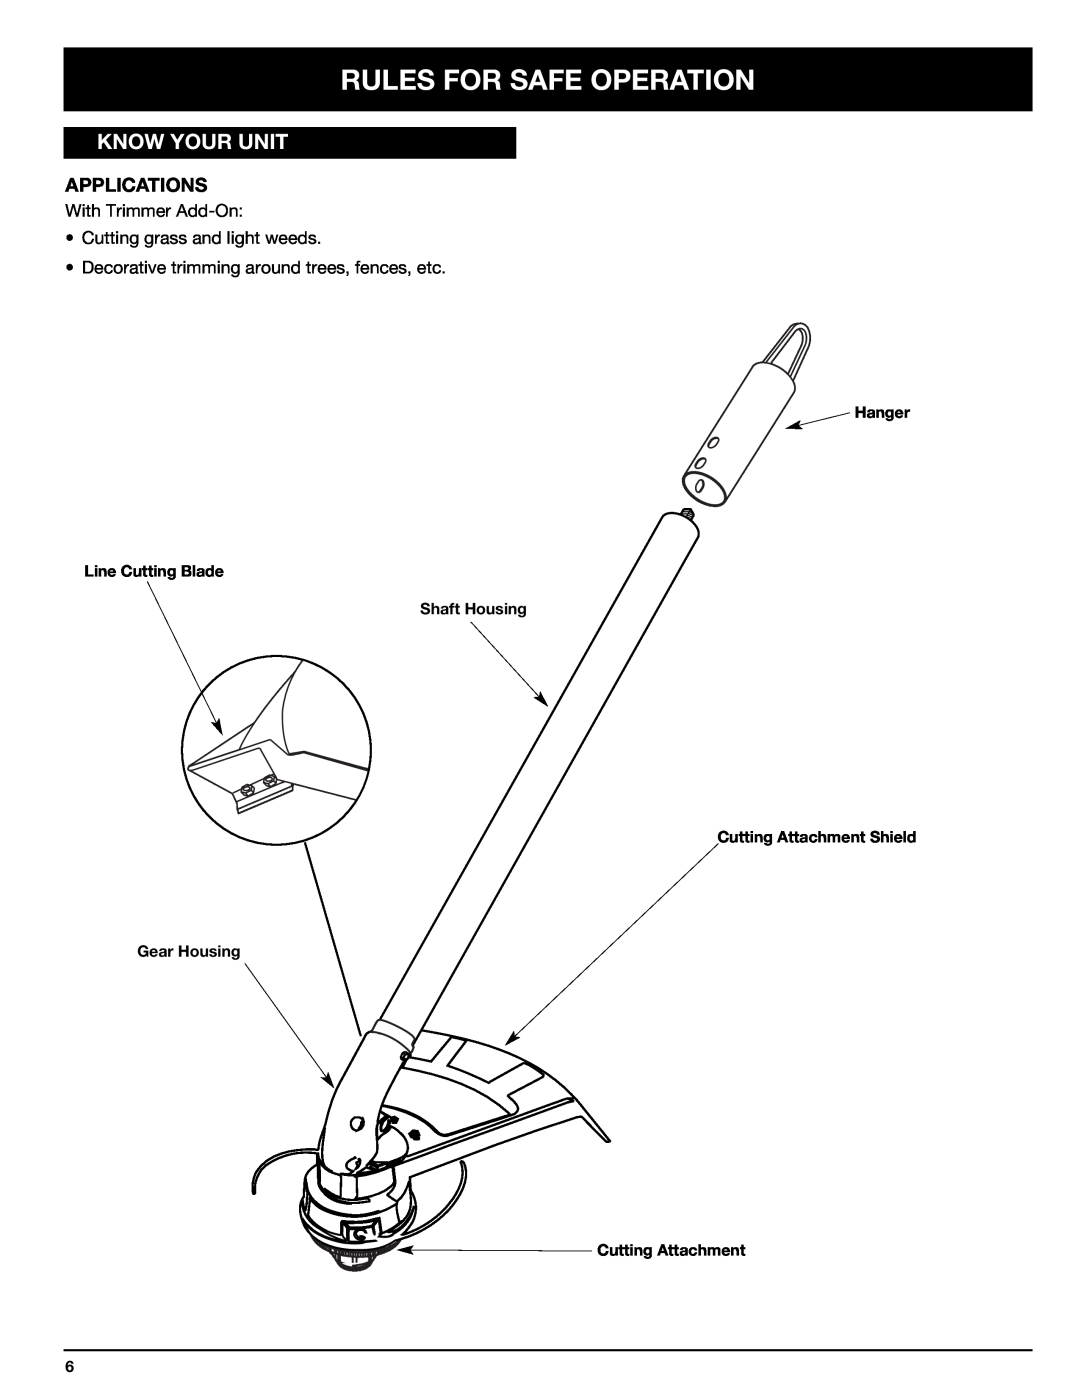 Troy-Bilt 769-00425A manual Know Your Unit, Applications, Rules For Safe Operation, Gear Housing Cutting Attachment 